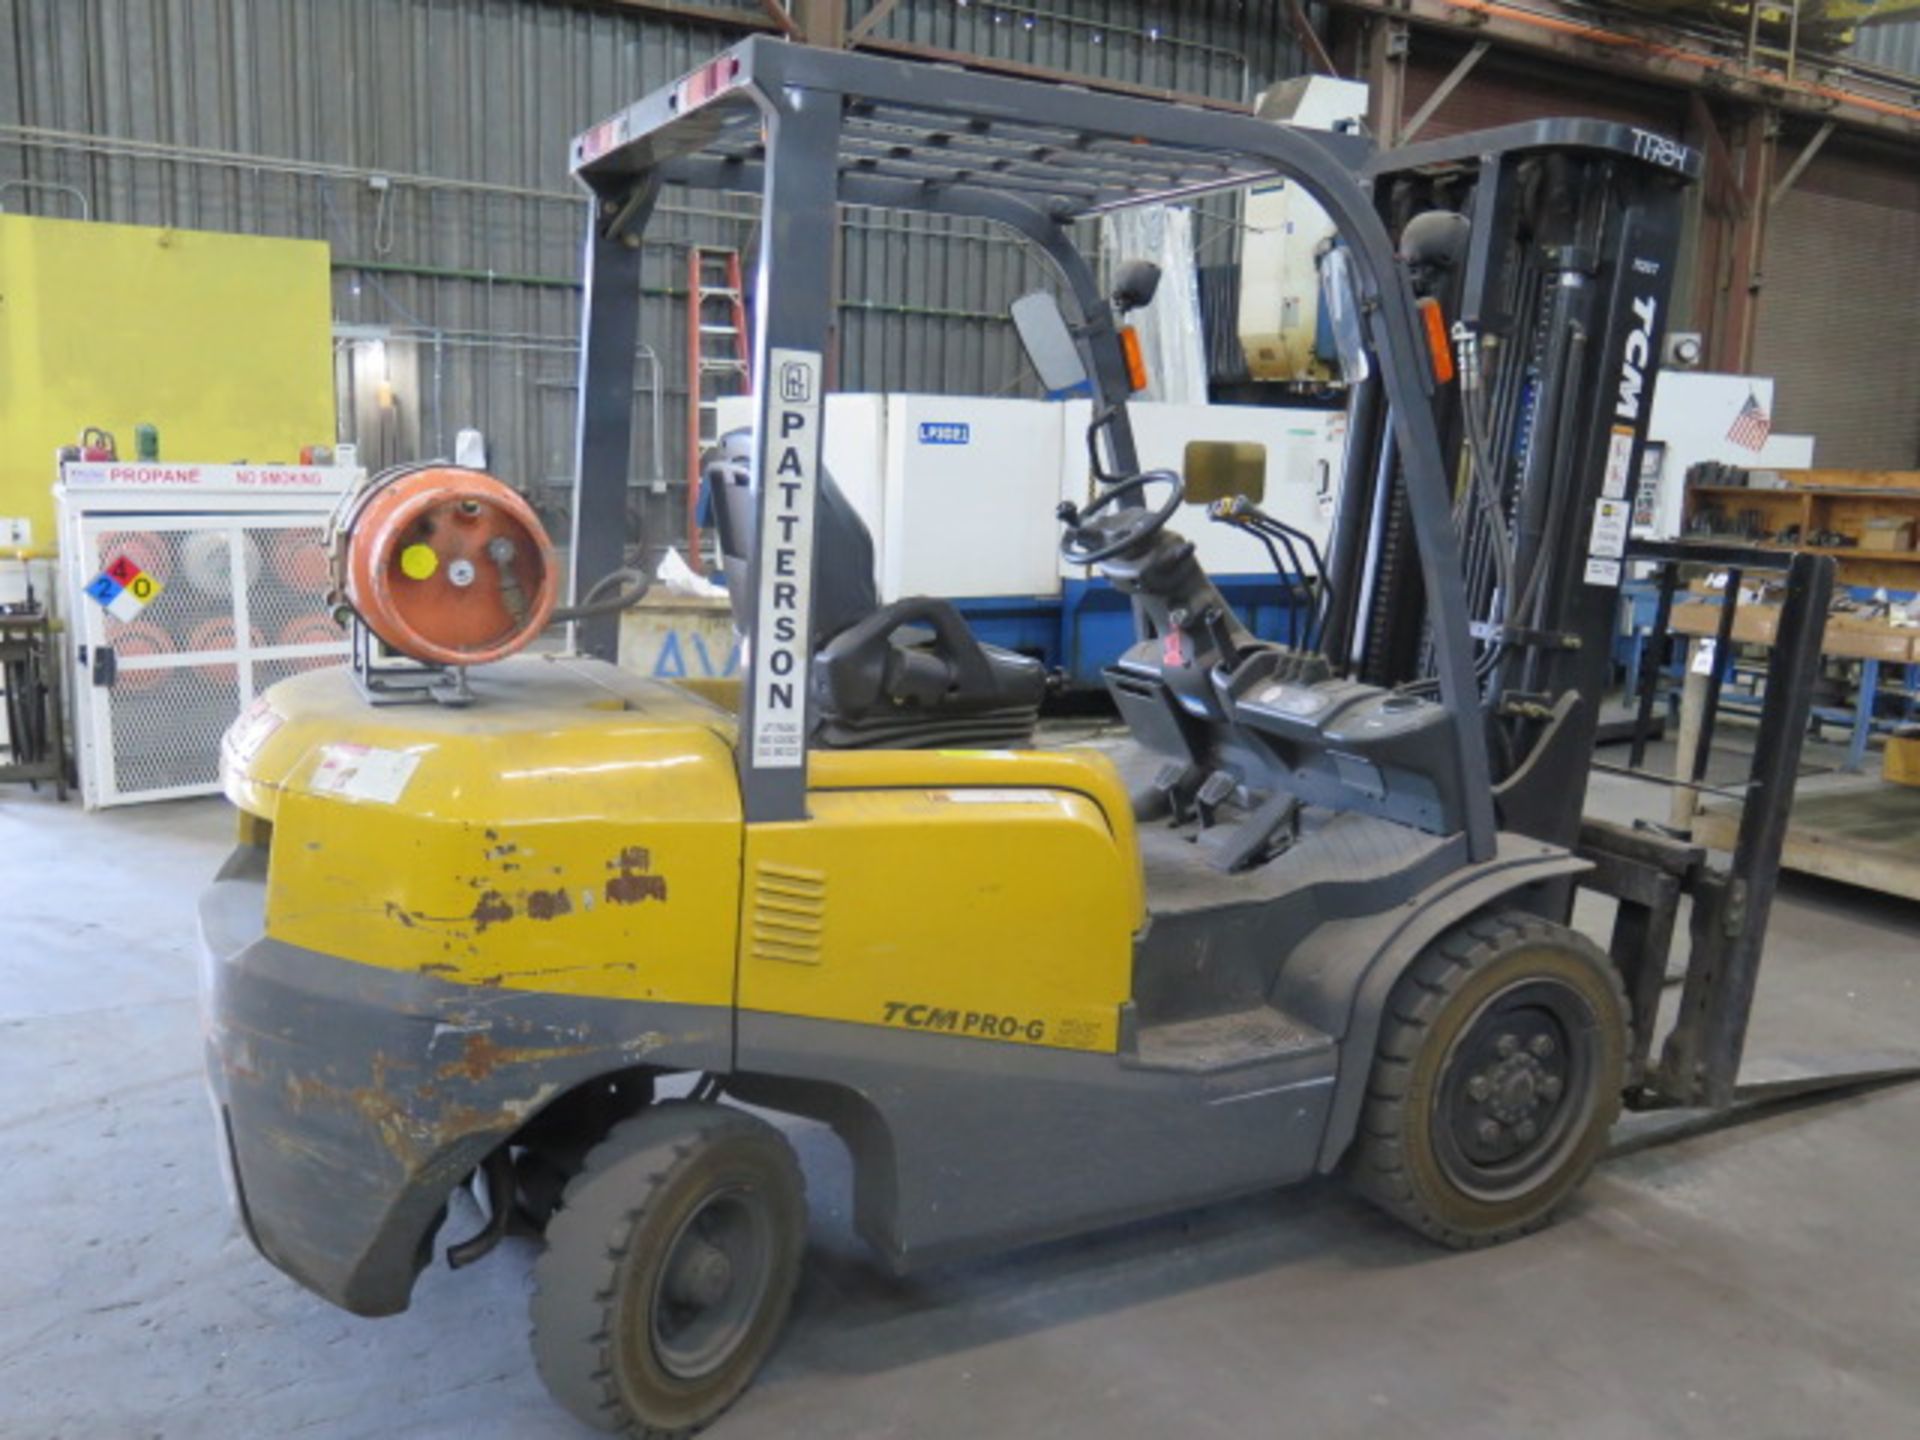 TCM PRO-G-25 6300 Lb Cap LPG Forklift s/n VFHM480-2Y5 / 100E-SSS-B08 w/ 3-Stage Mast, SOLD AS IS - Image 10 of 17